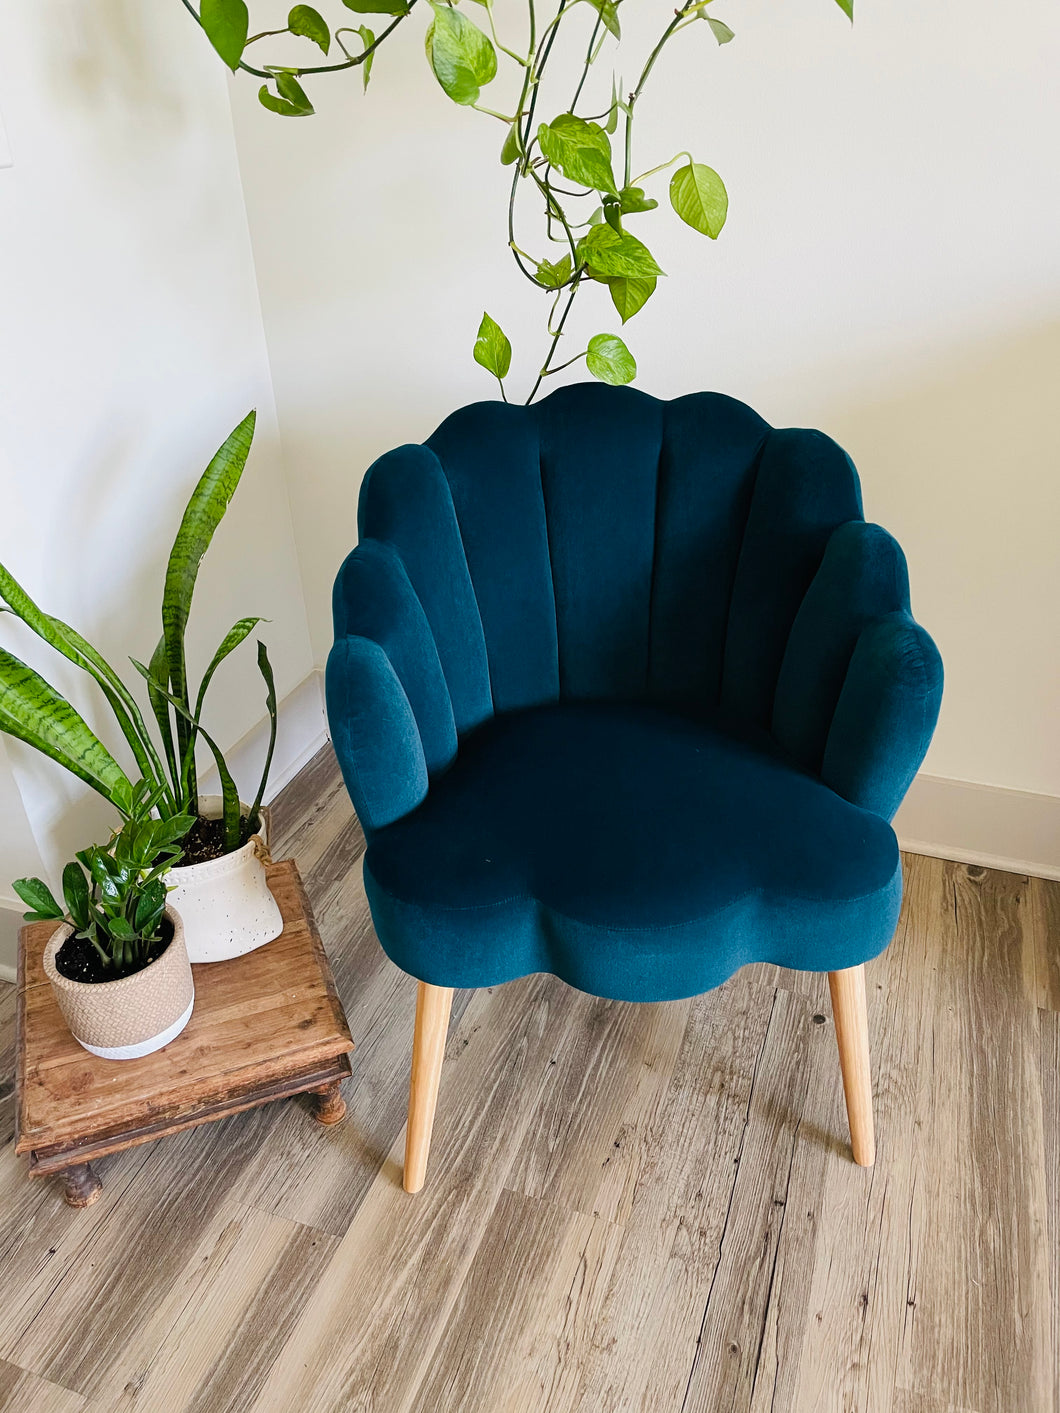 teal scalloped chair